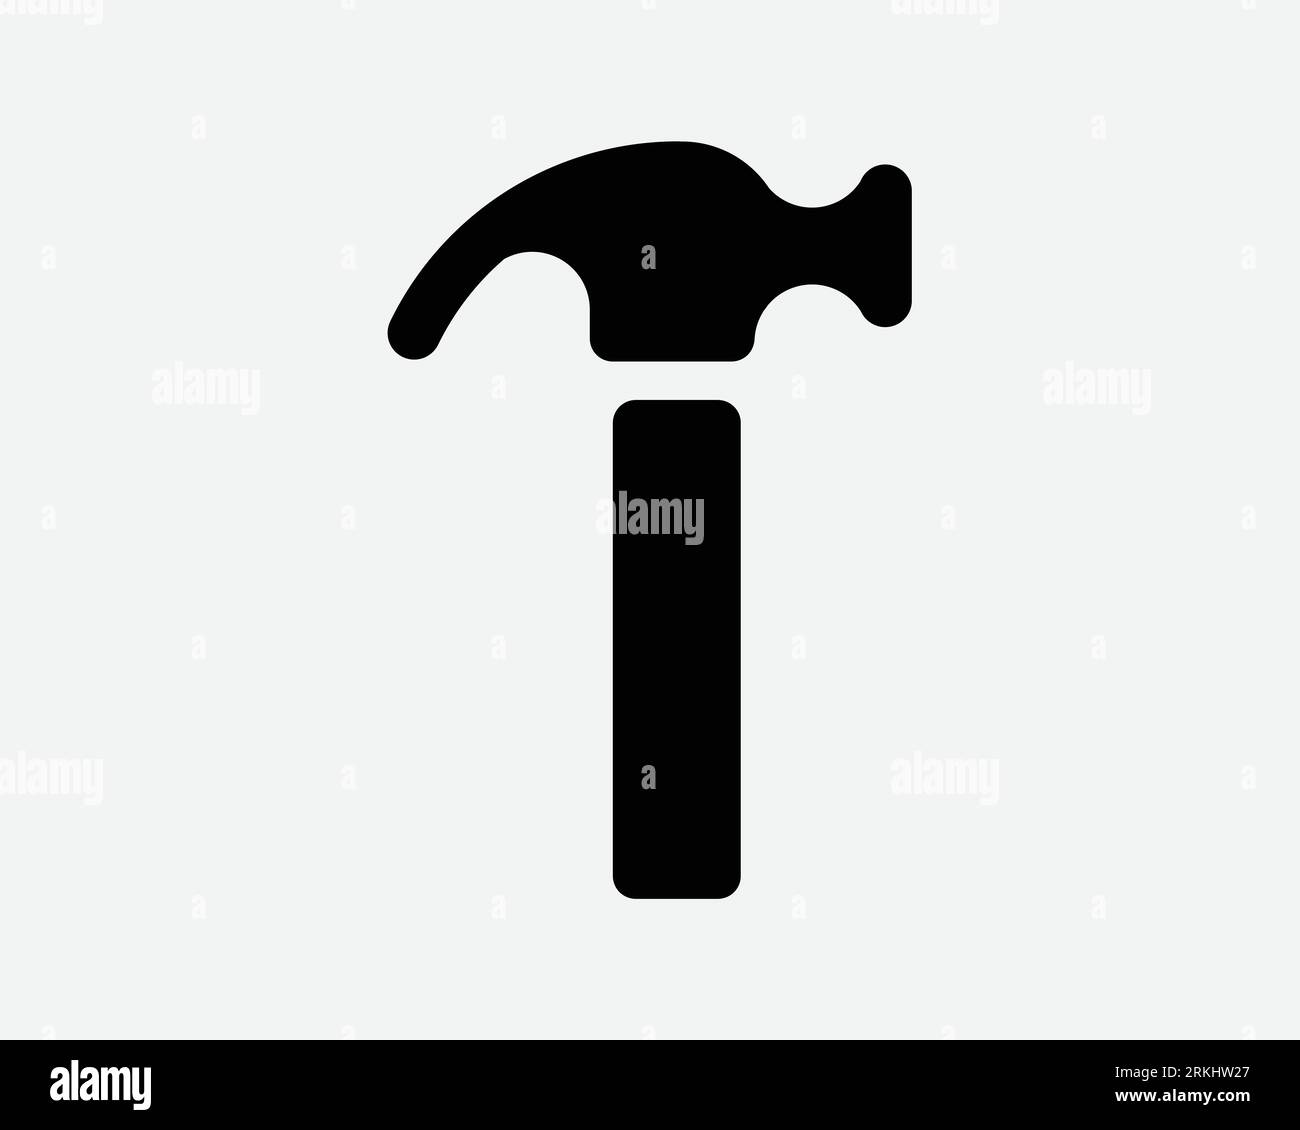 Hammer Icon Construction Work Repair Renovation Building Industrial Industry Job Tool Black White Shape Vector Clipart Graphic Artwork Sign Symbol Stock Vector